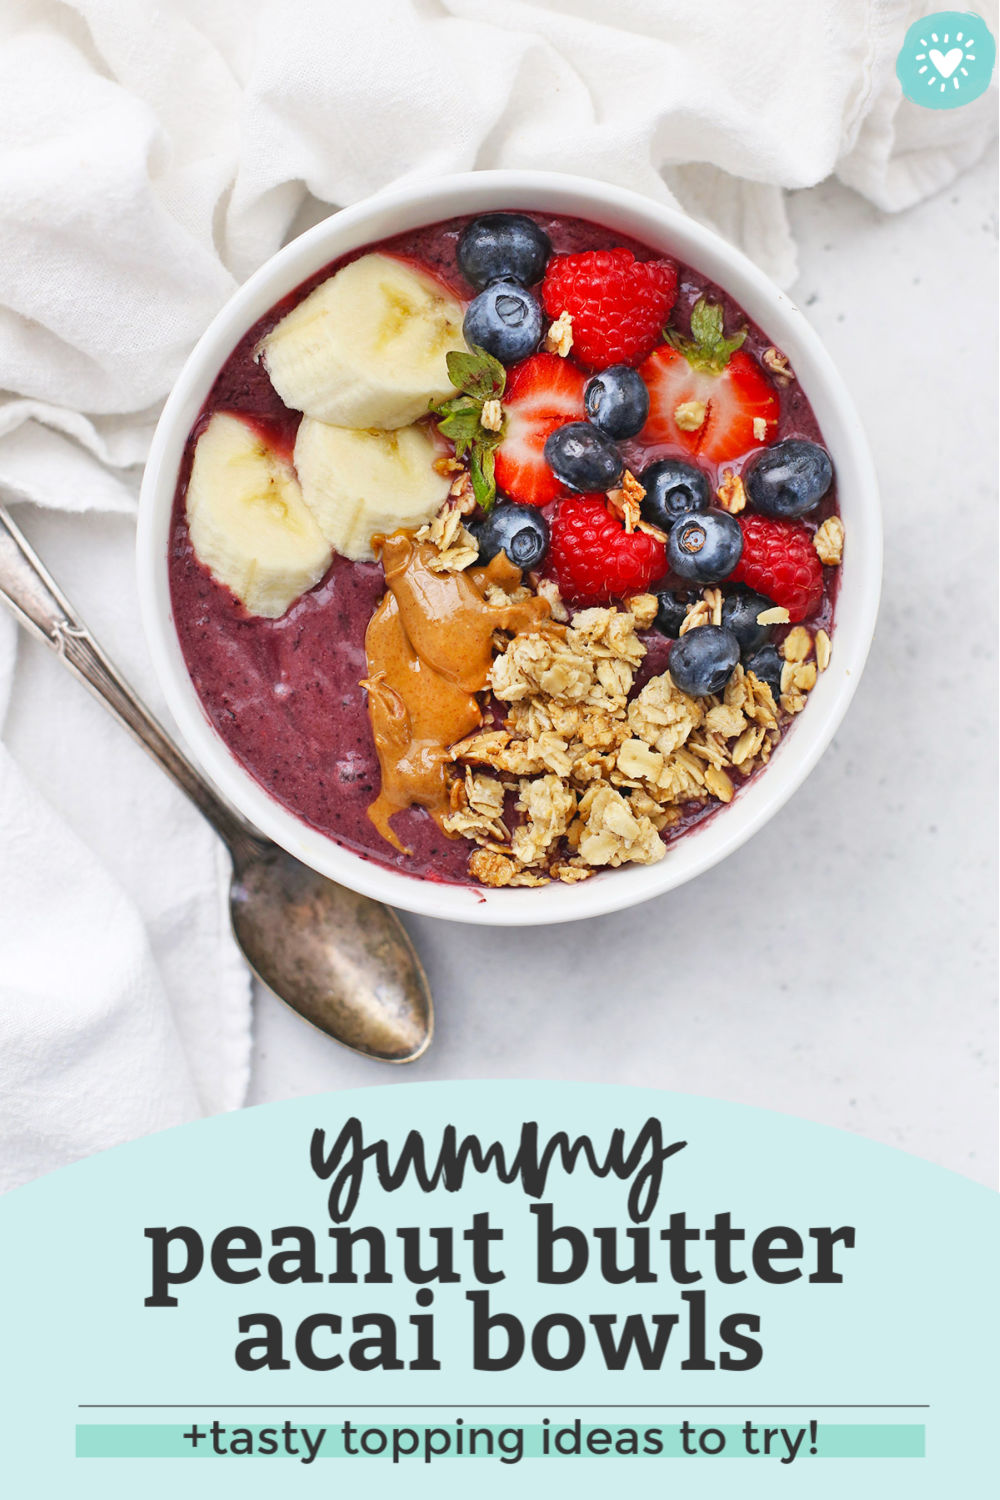 Peanut Butter Acai Bowl with Toppings on a White Background with a text overlay that reads "Yummy Peanut Butter Acai Bowls + Tasty Topping Ideas to Try!"